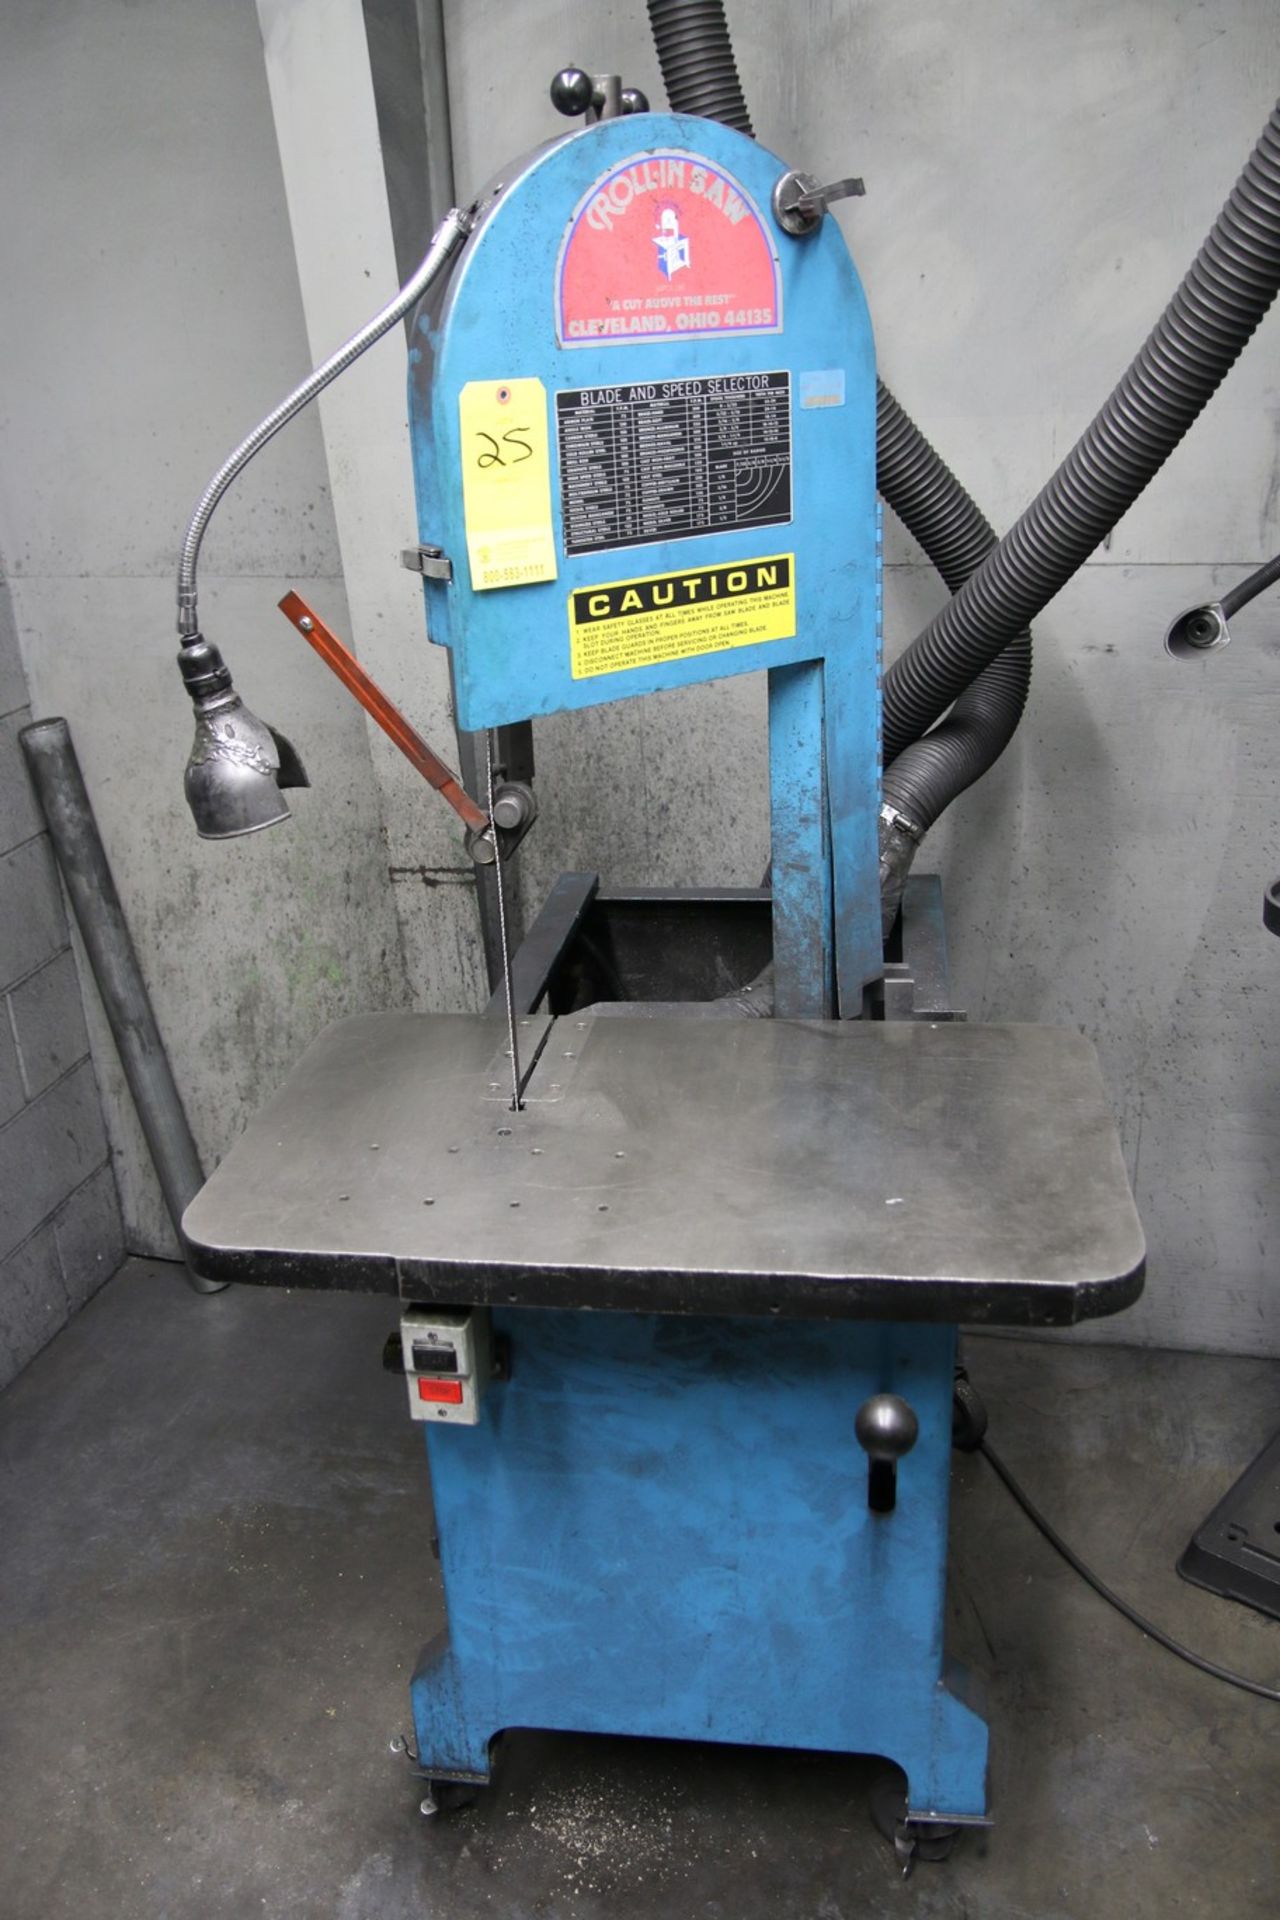 Roll-In Roll-In Gravity Feed Vertical Band Saw 1 HP, 45 Degree Vise Miter at Maximum